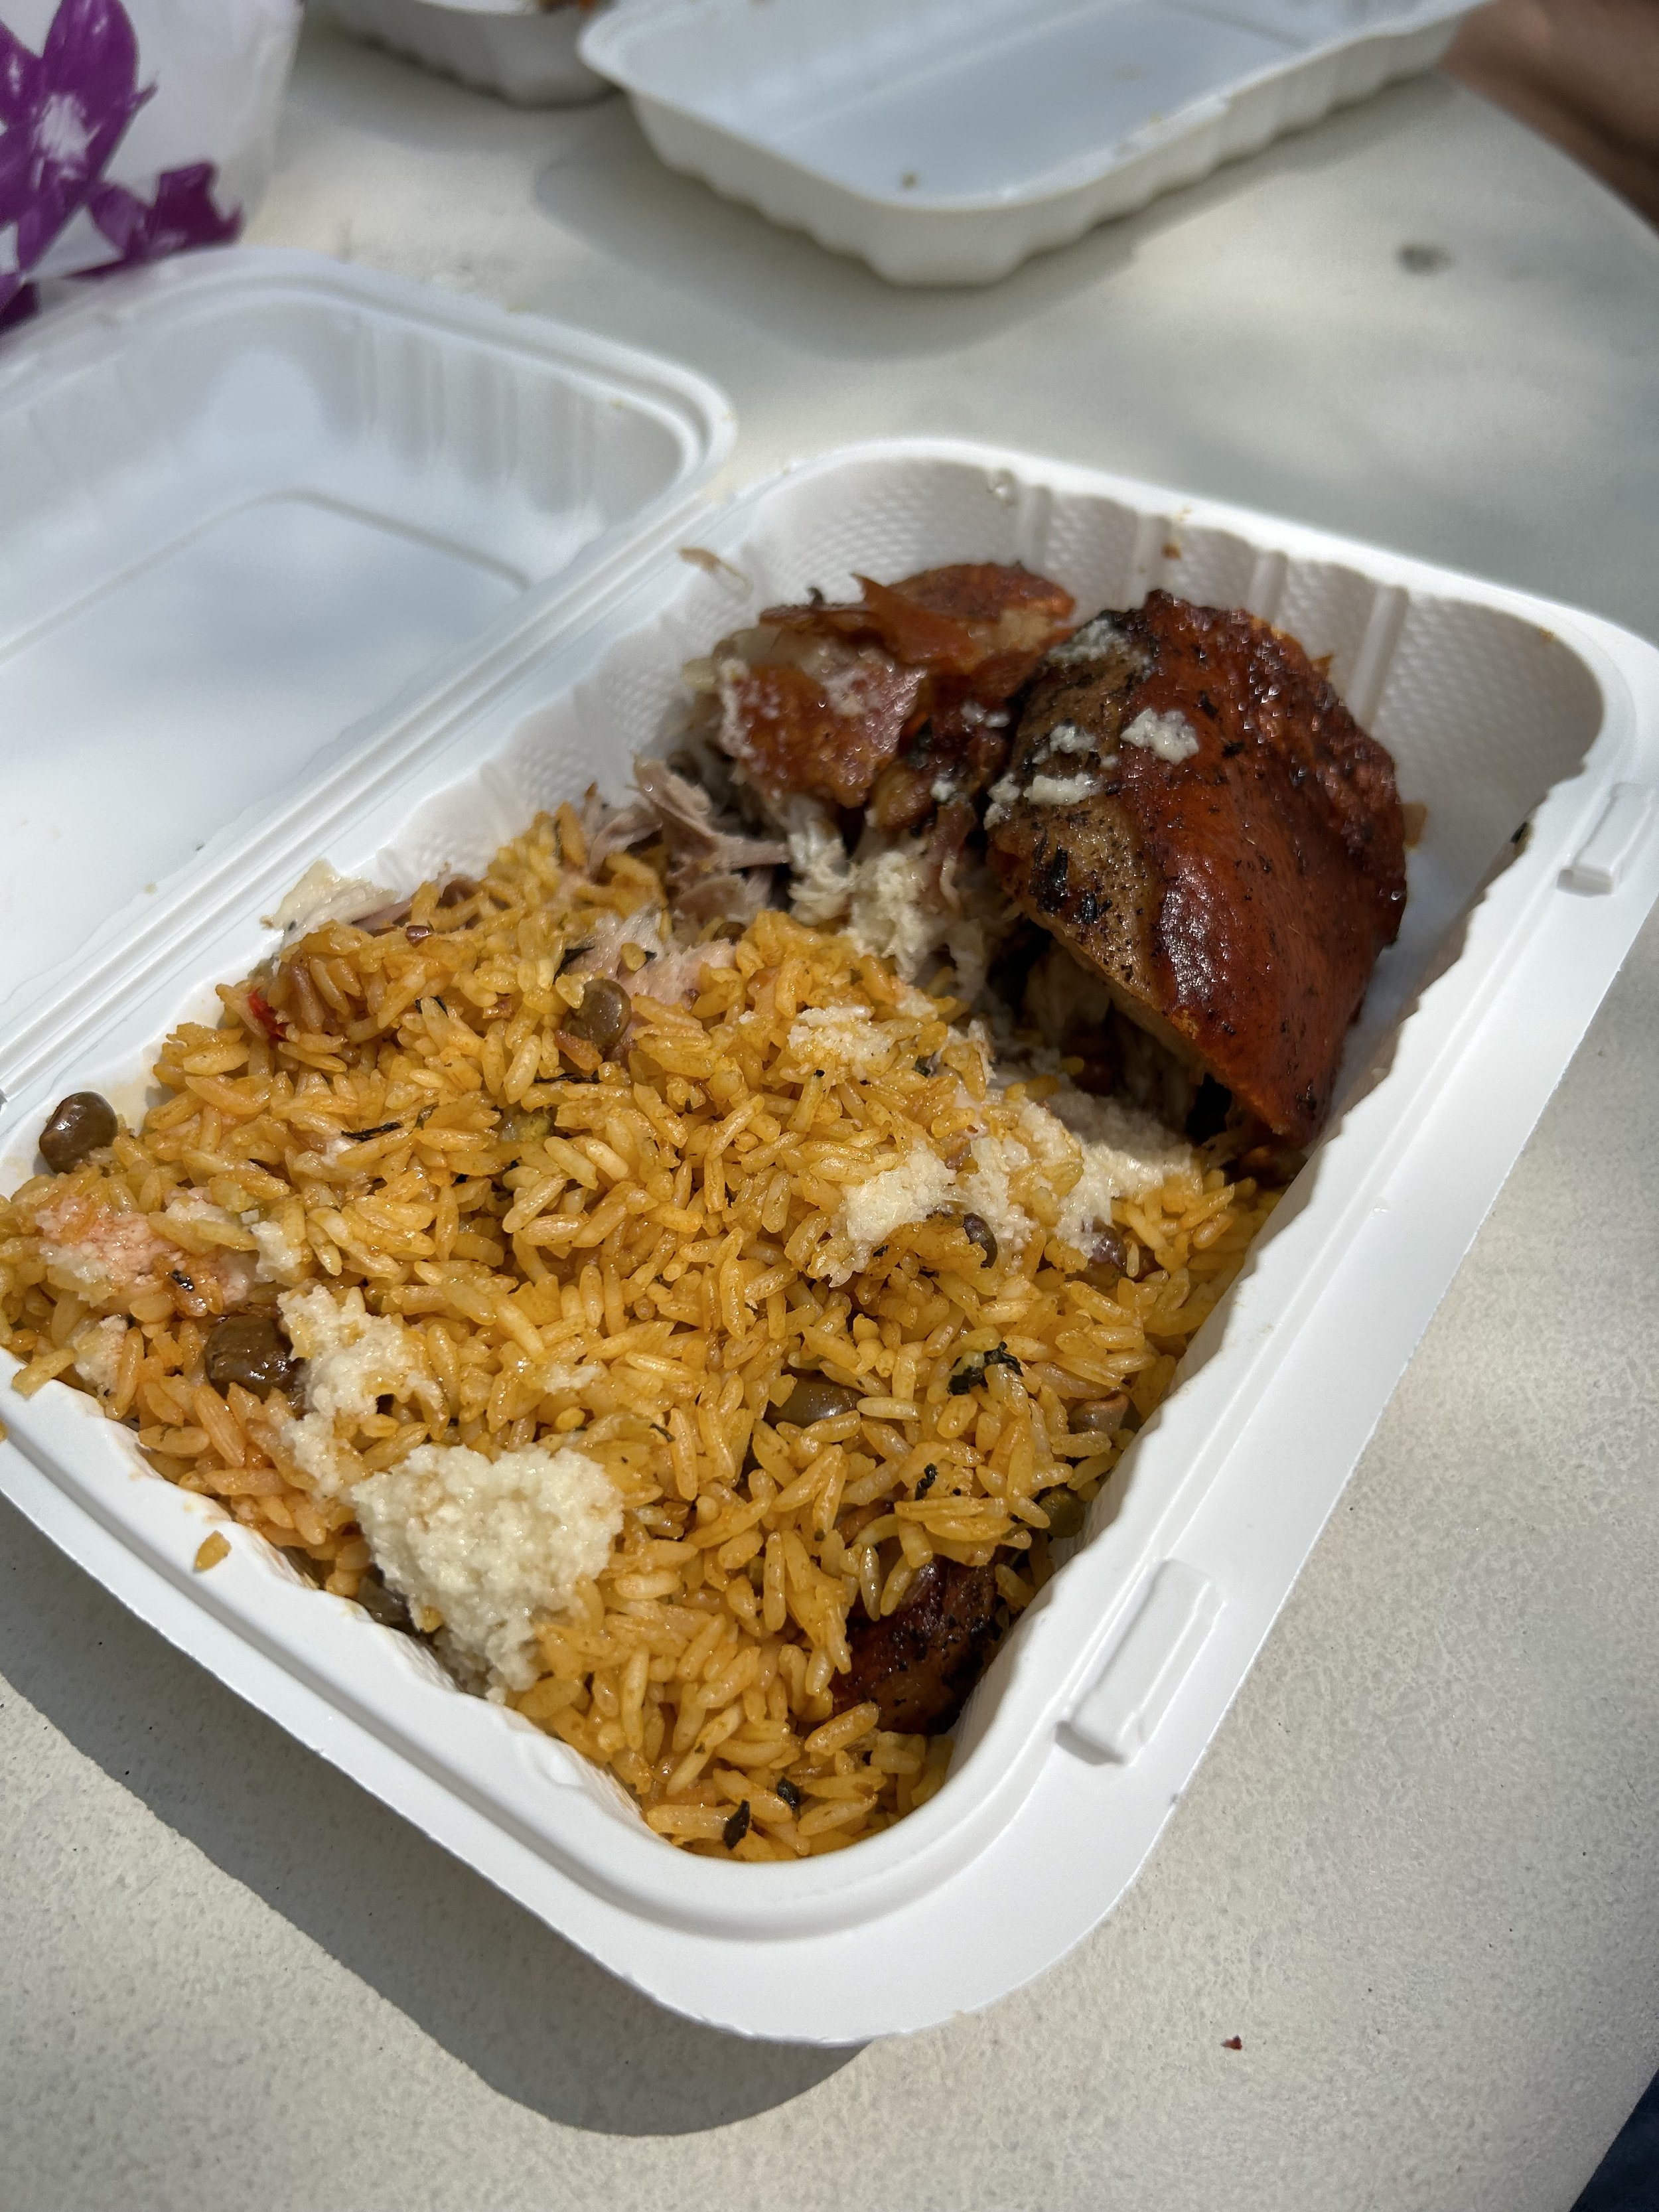 A portion of roast pork, rice and gandules!